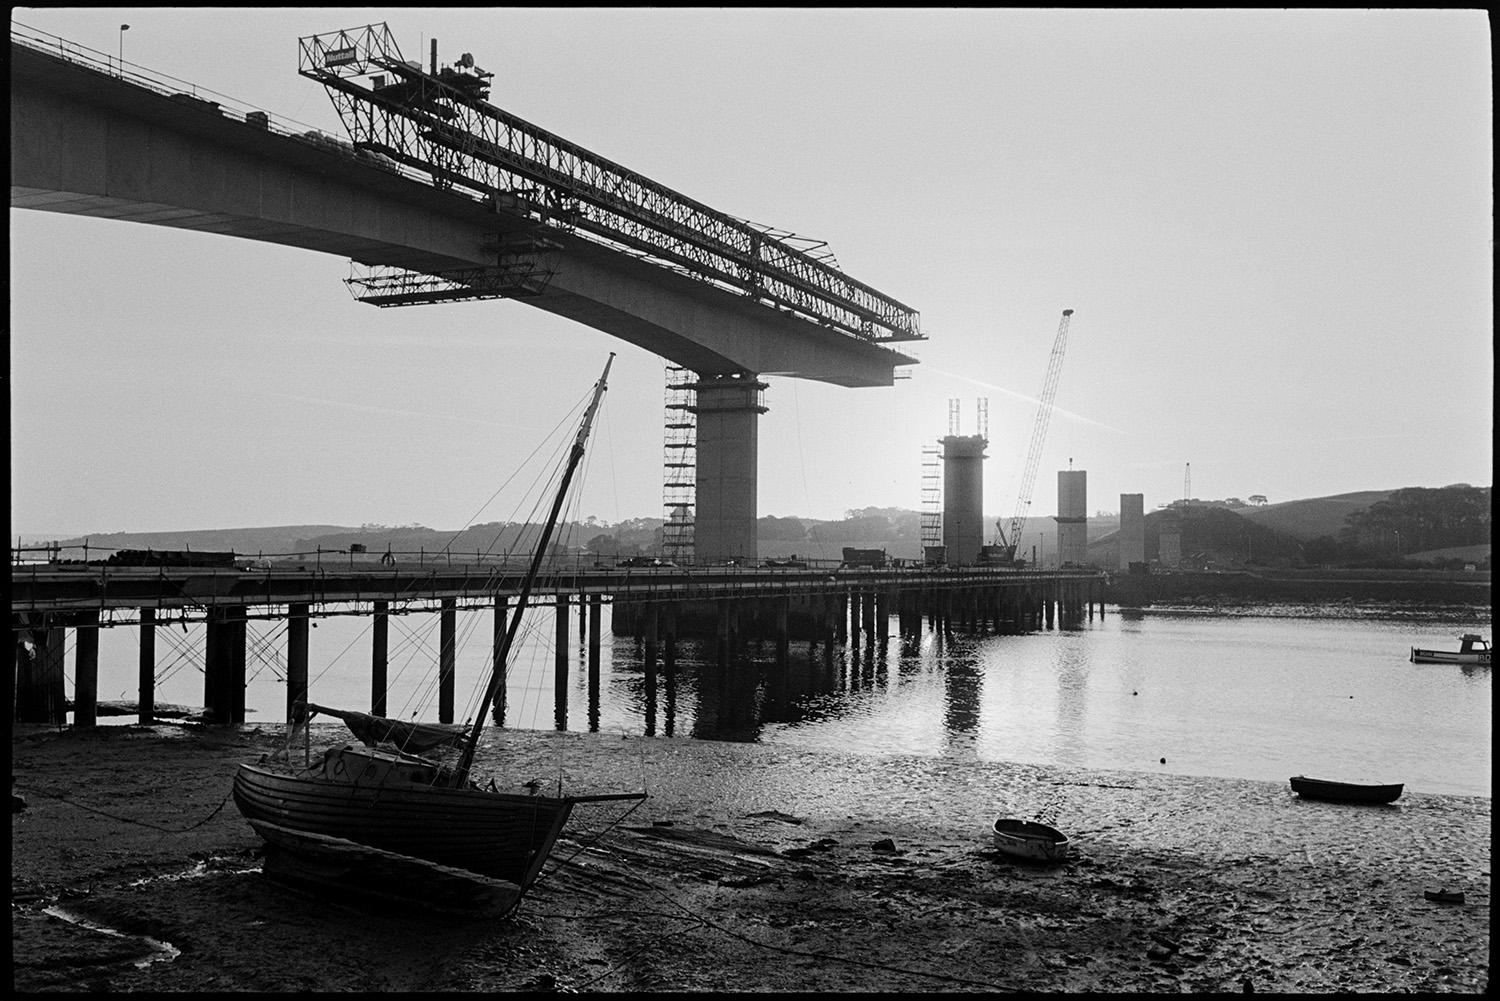 Construction of new bridge across river. 
[Cranes constructing Bideford New Bridge across the River Torridge. Boats can be seen on the mud flats of the river.]